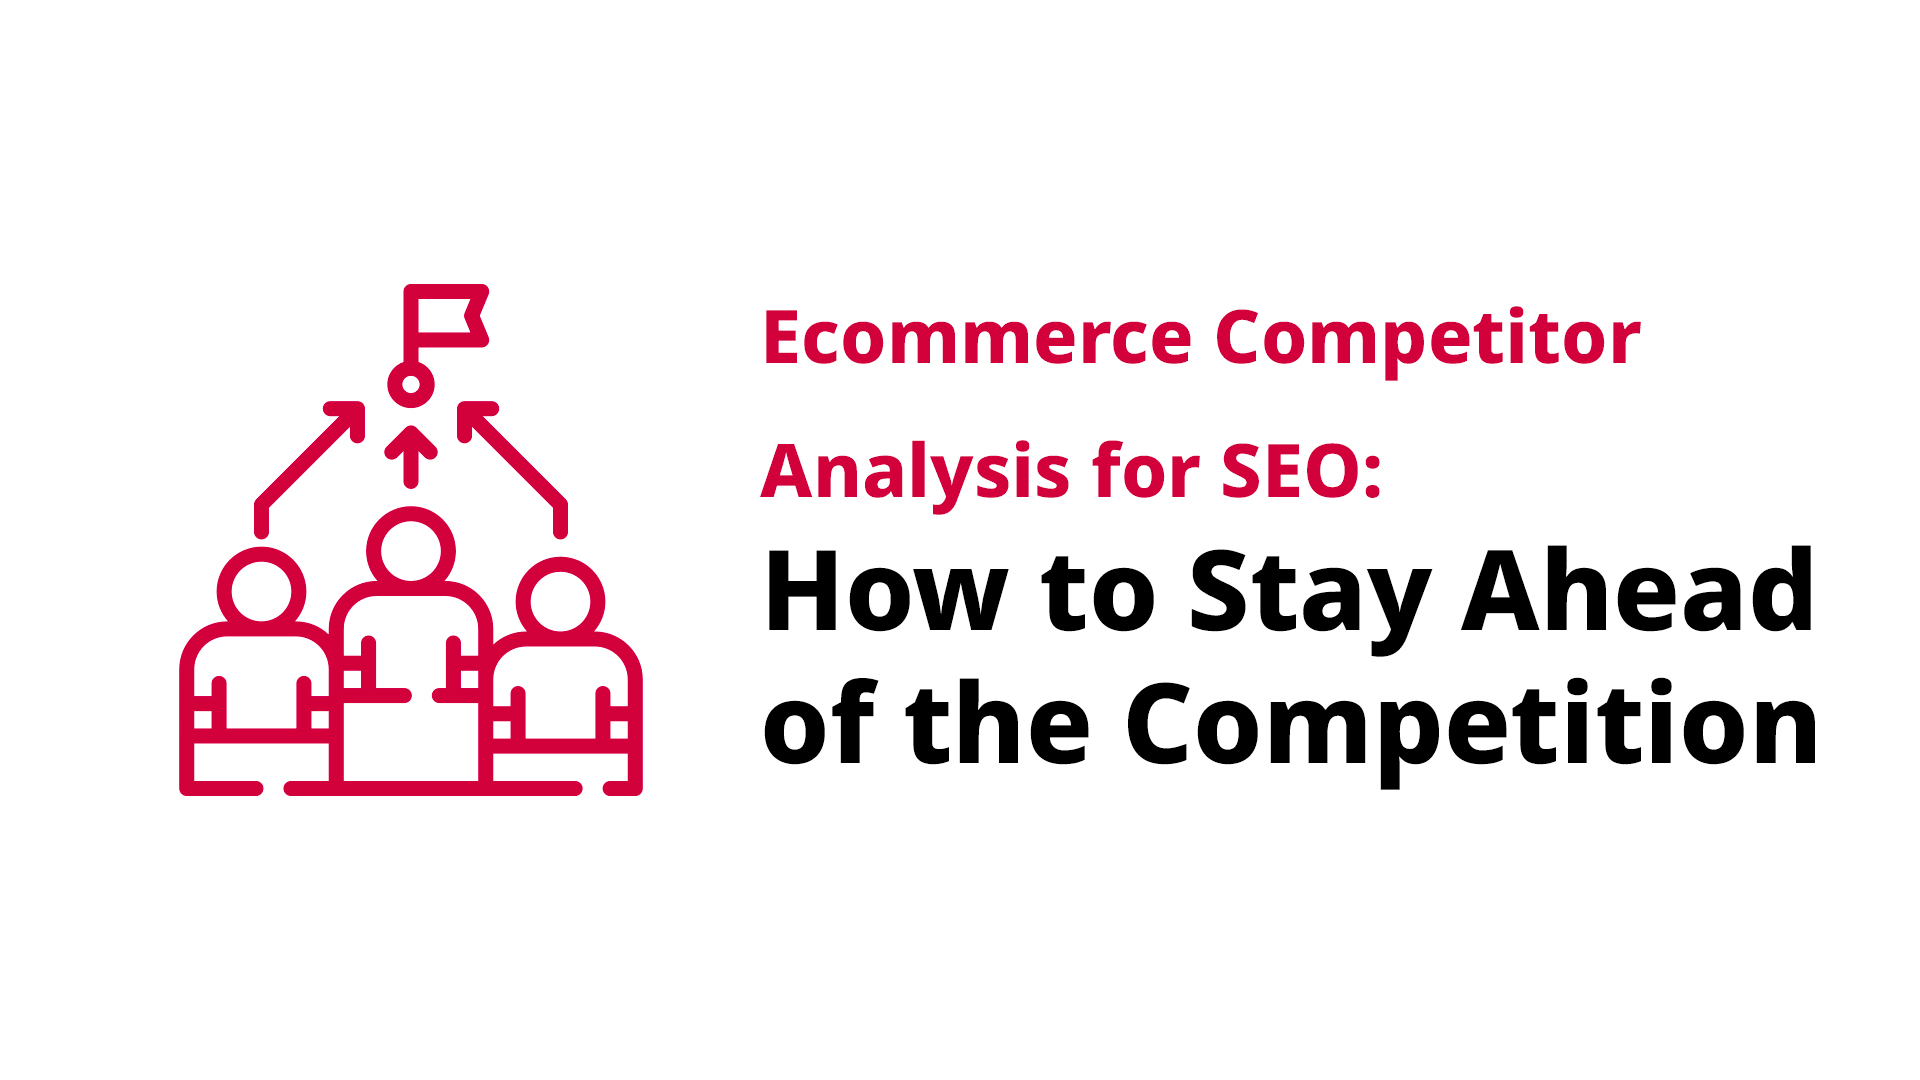 Ecommerce Competitor Analysis for SEO: How to Stay Ahead of the Competition